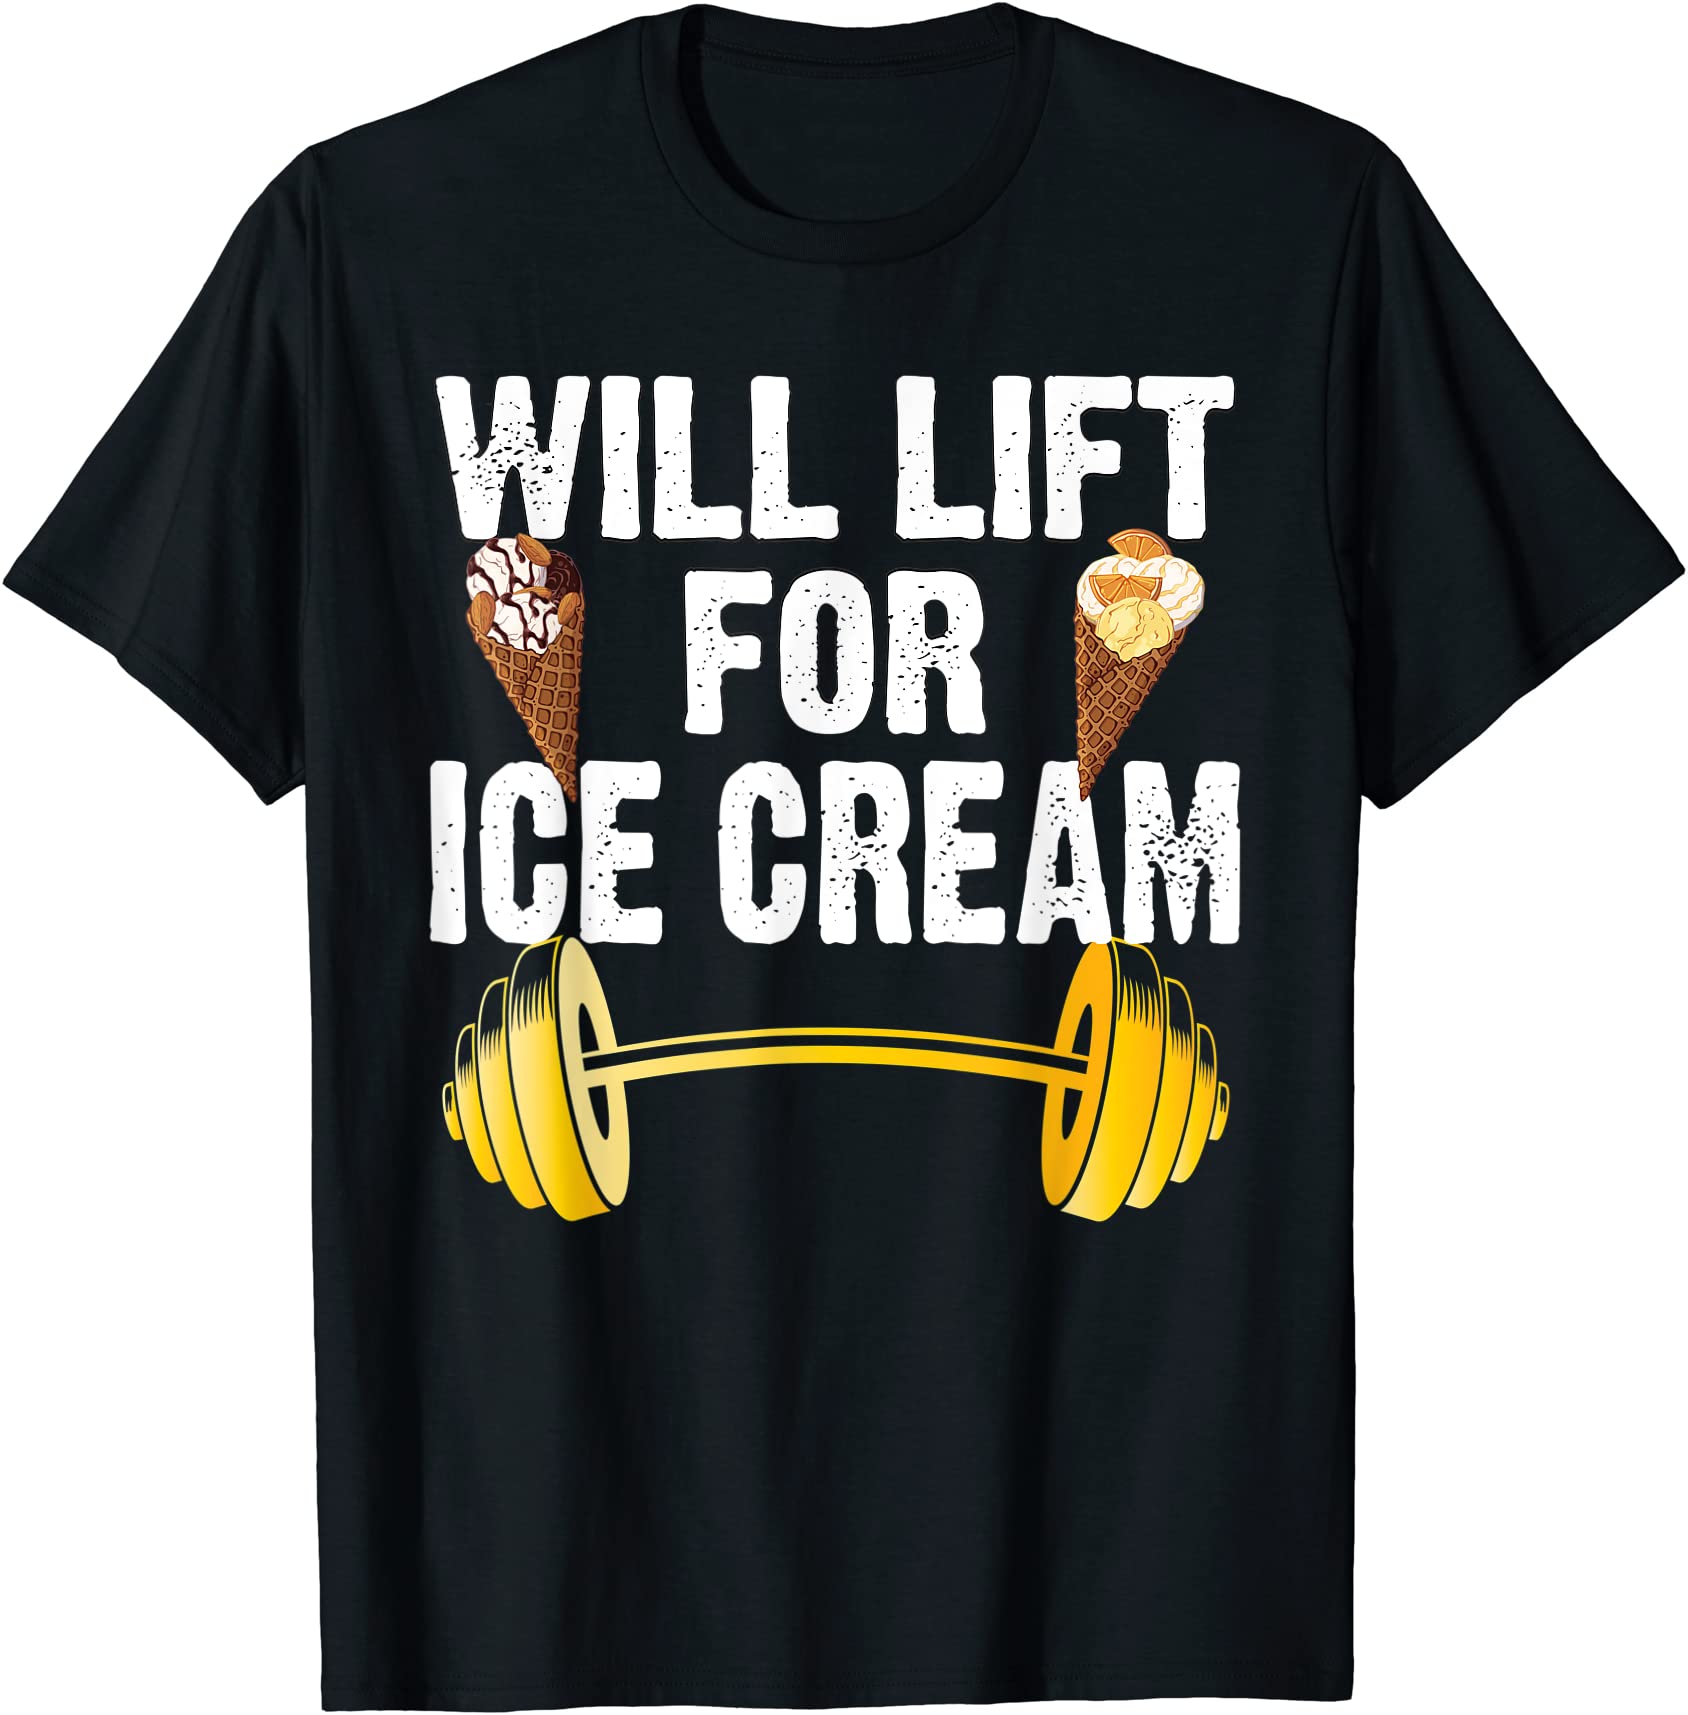 will lift for ice cream funny weightlifting t shirt men - Buy t-shirt ...